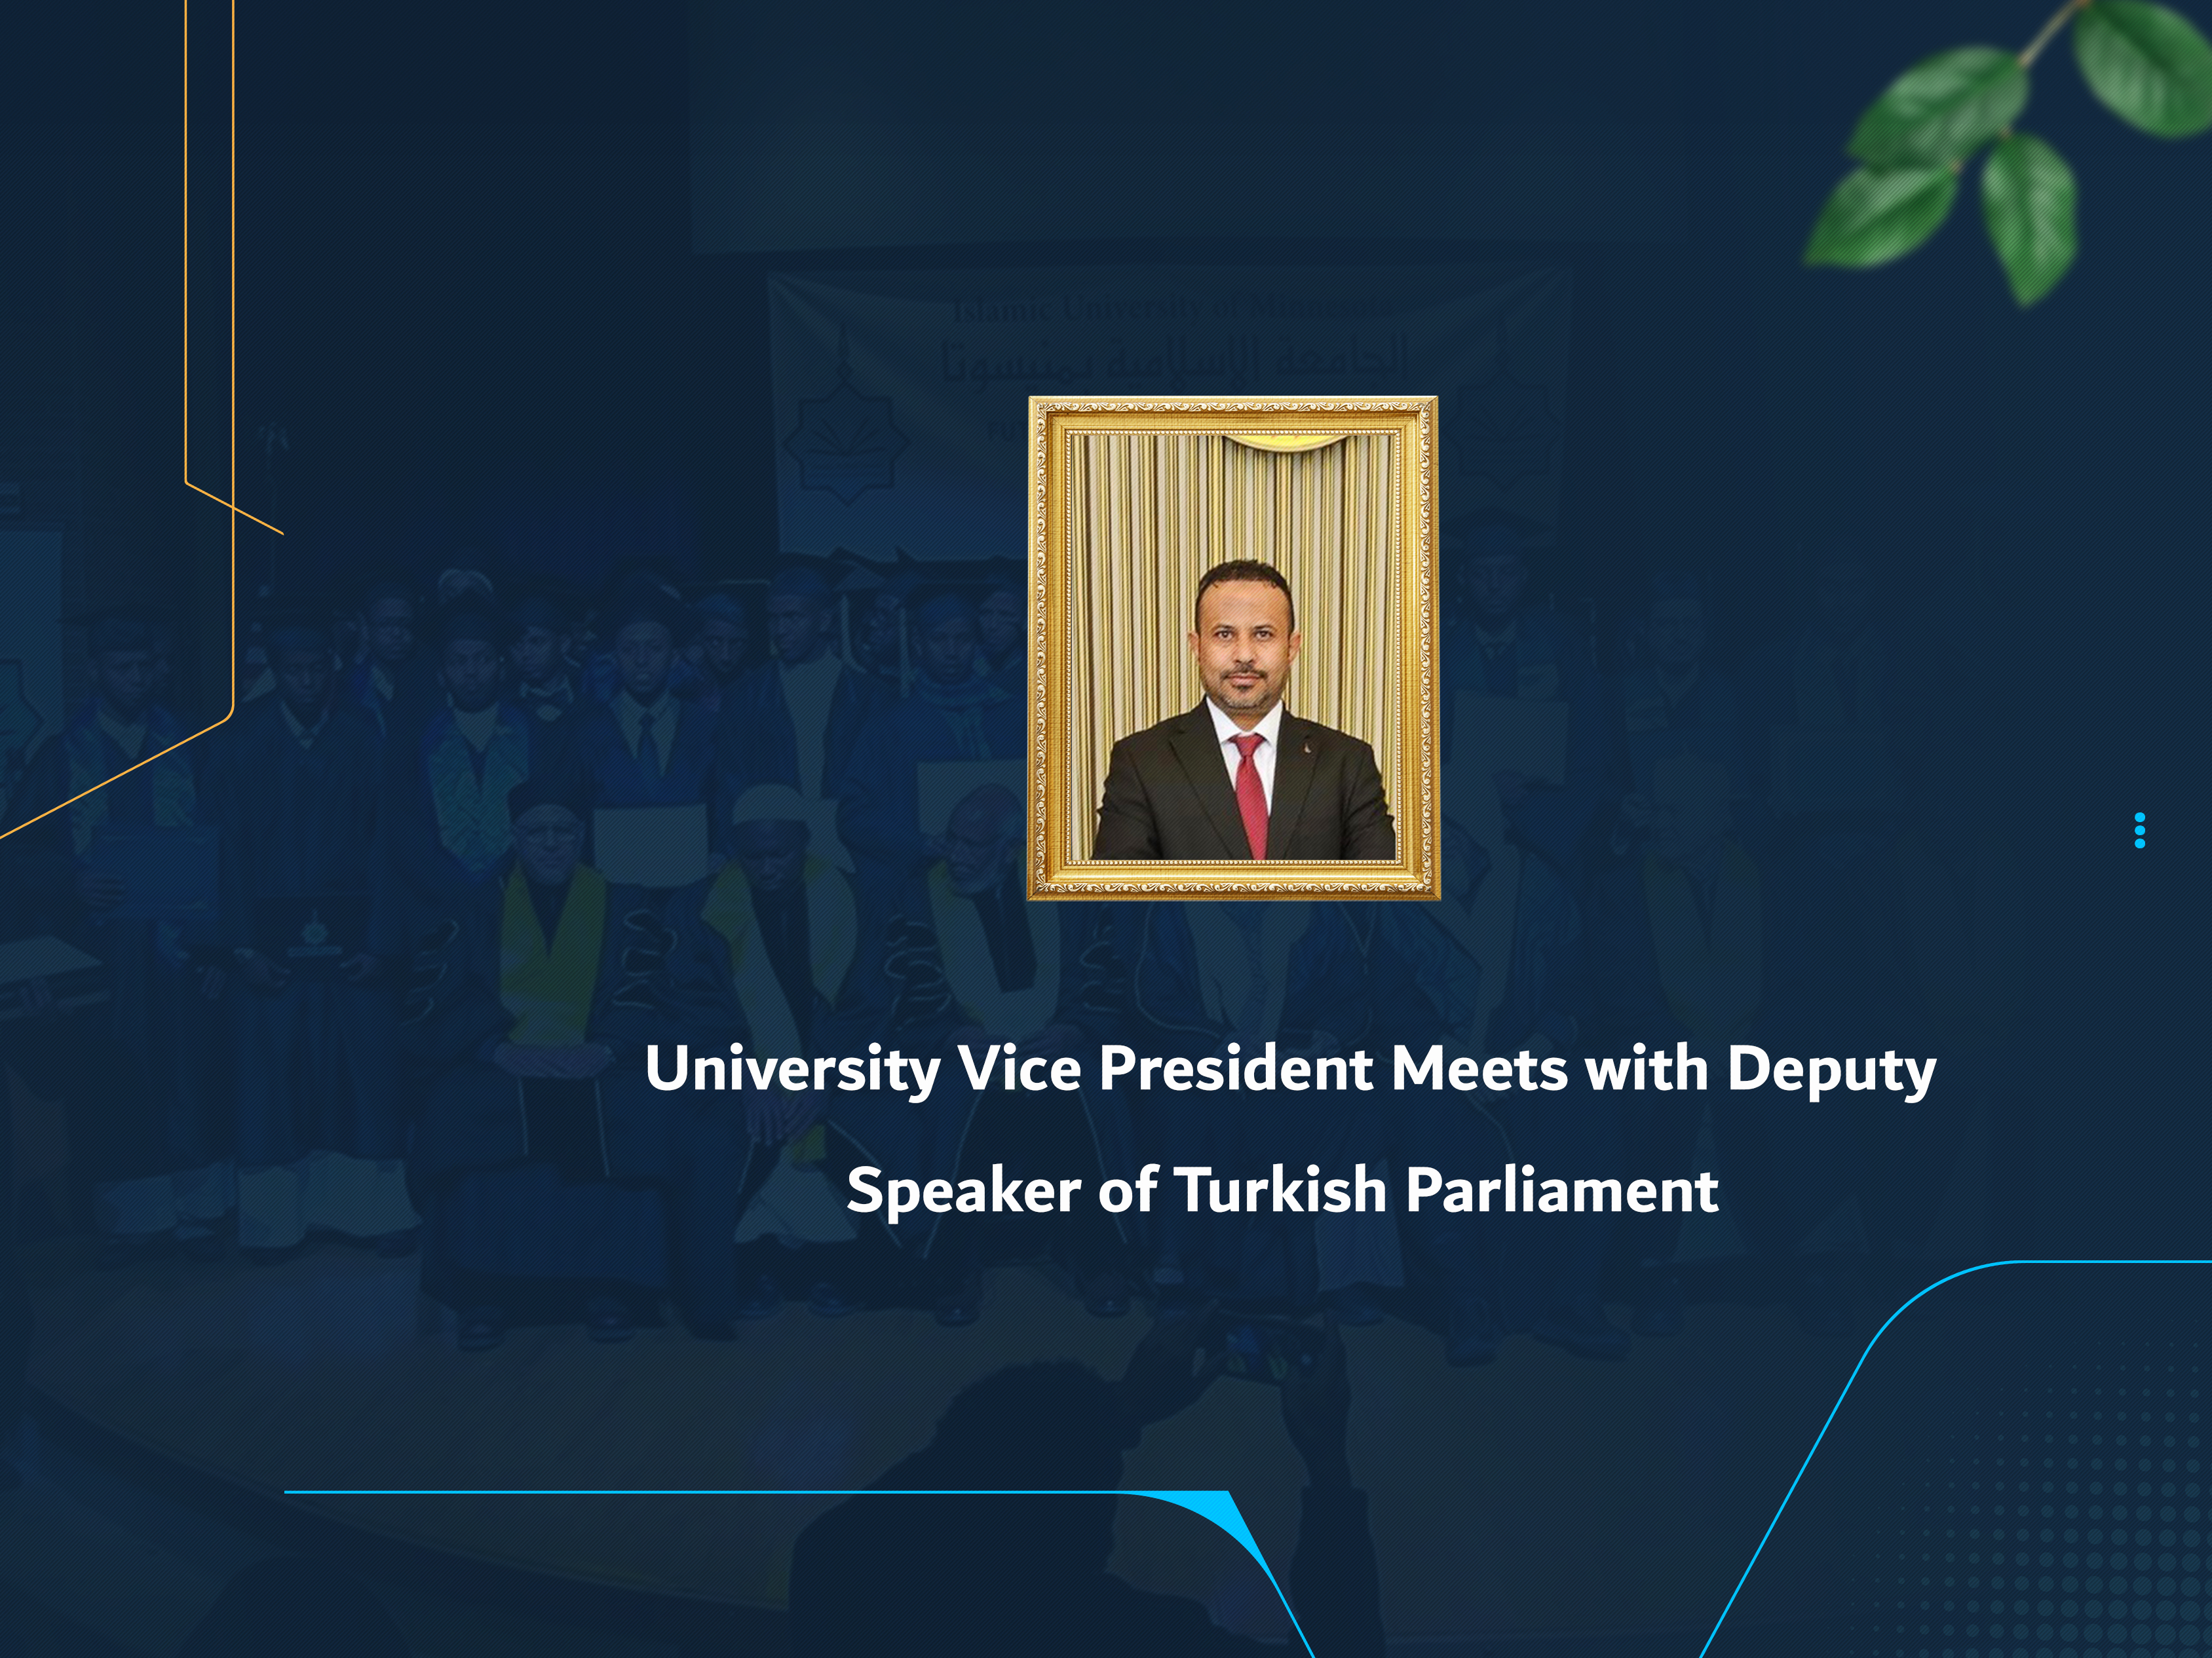 University Vice President Meets with Deputy Speaker of Turkish Parliament